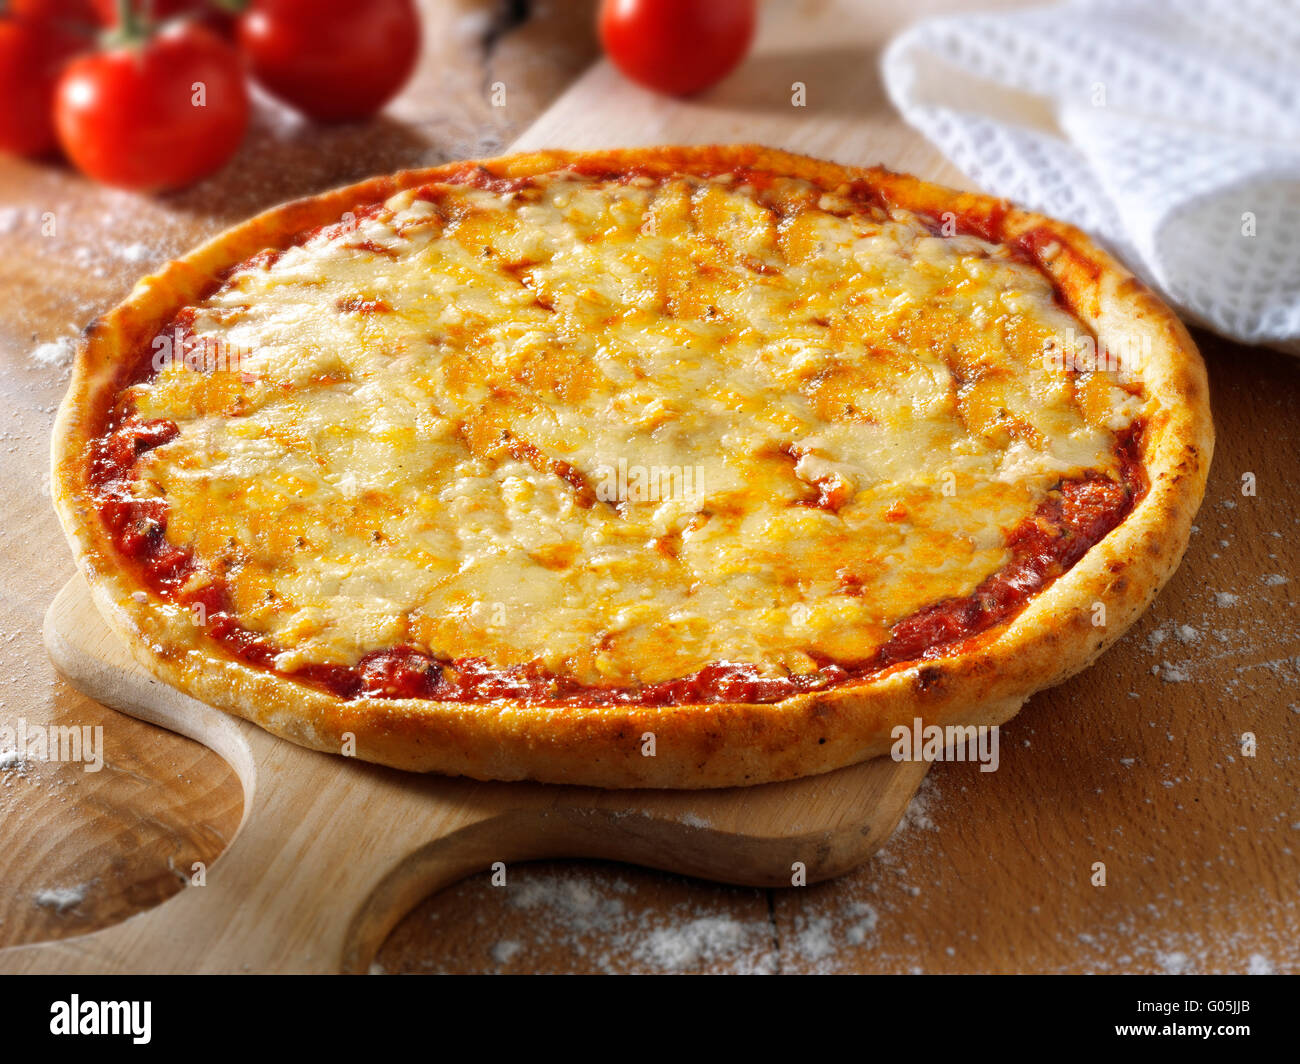 Cooked whole cheese and tomato Margherita pizza Stock Photo